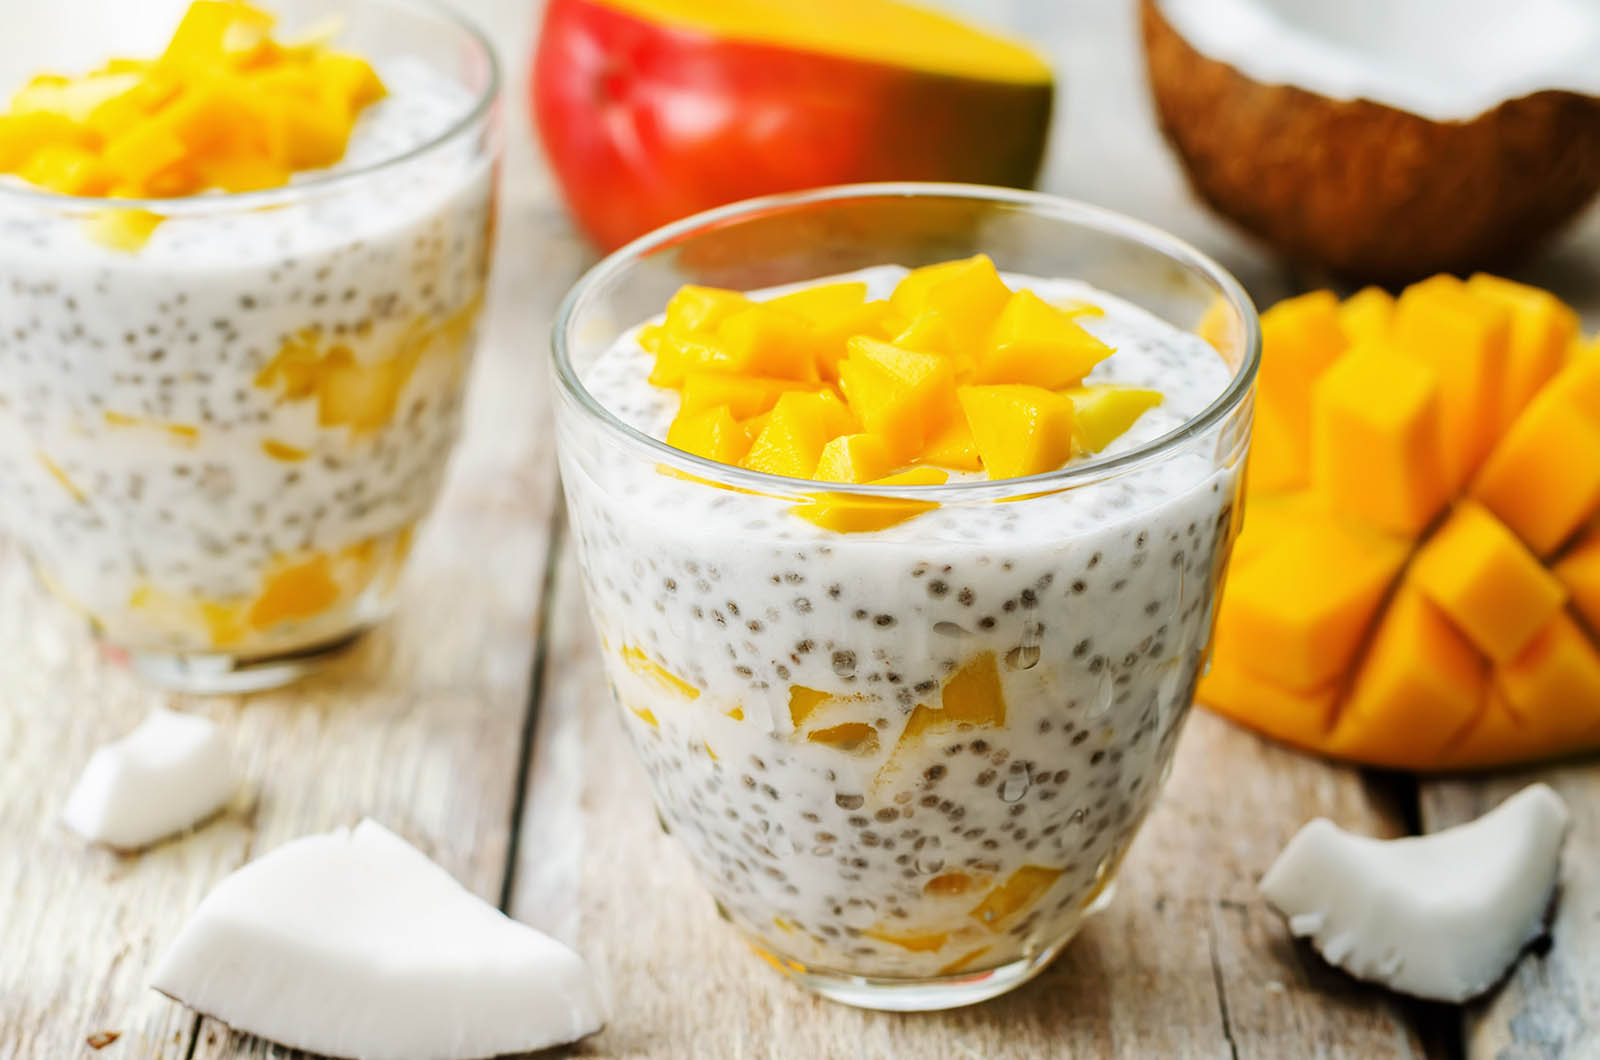 🥗 How Many of These Healthy Food Trends Have You Tried? Mango Chia Seed Pudding